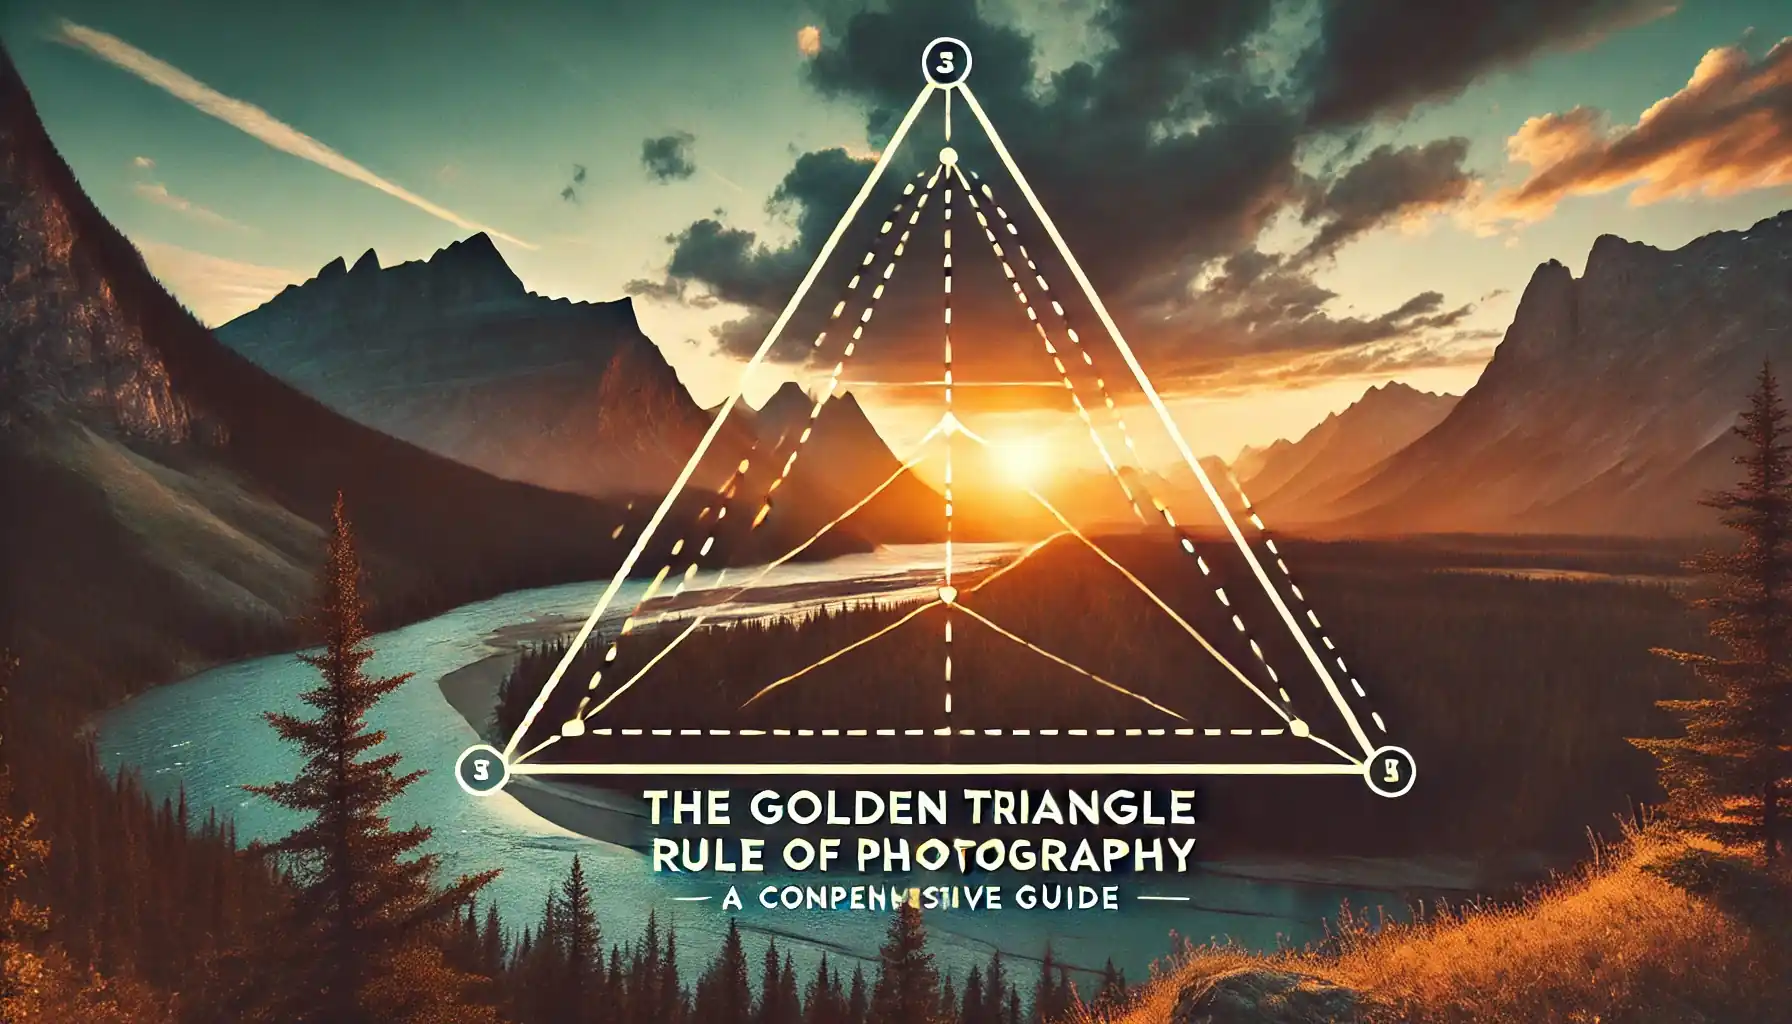 The Golden Triangle Rule of Photography: A Comprehensive Guide